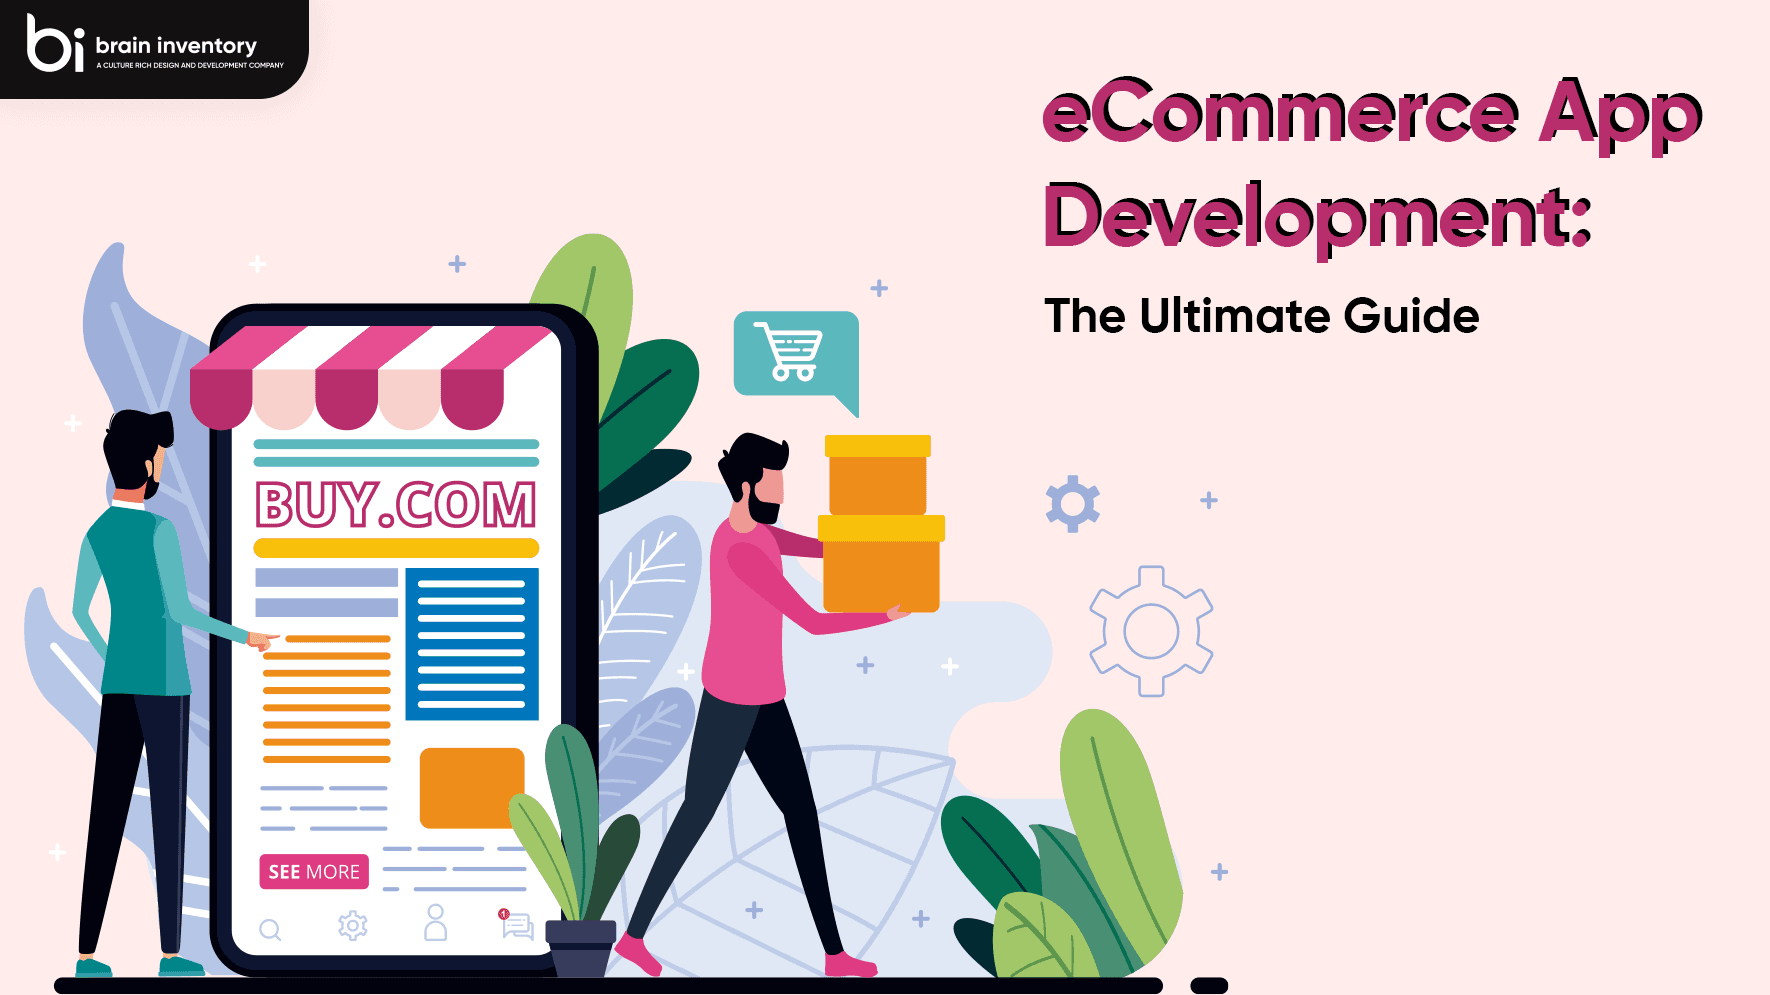 eCommerce App Development: The Ultimate Guide